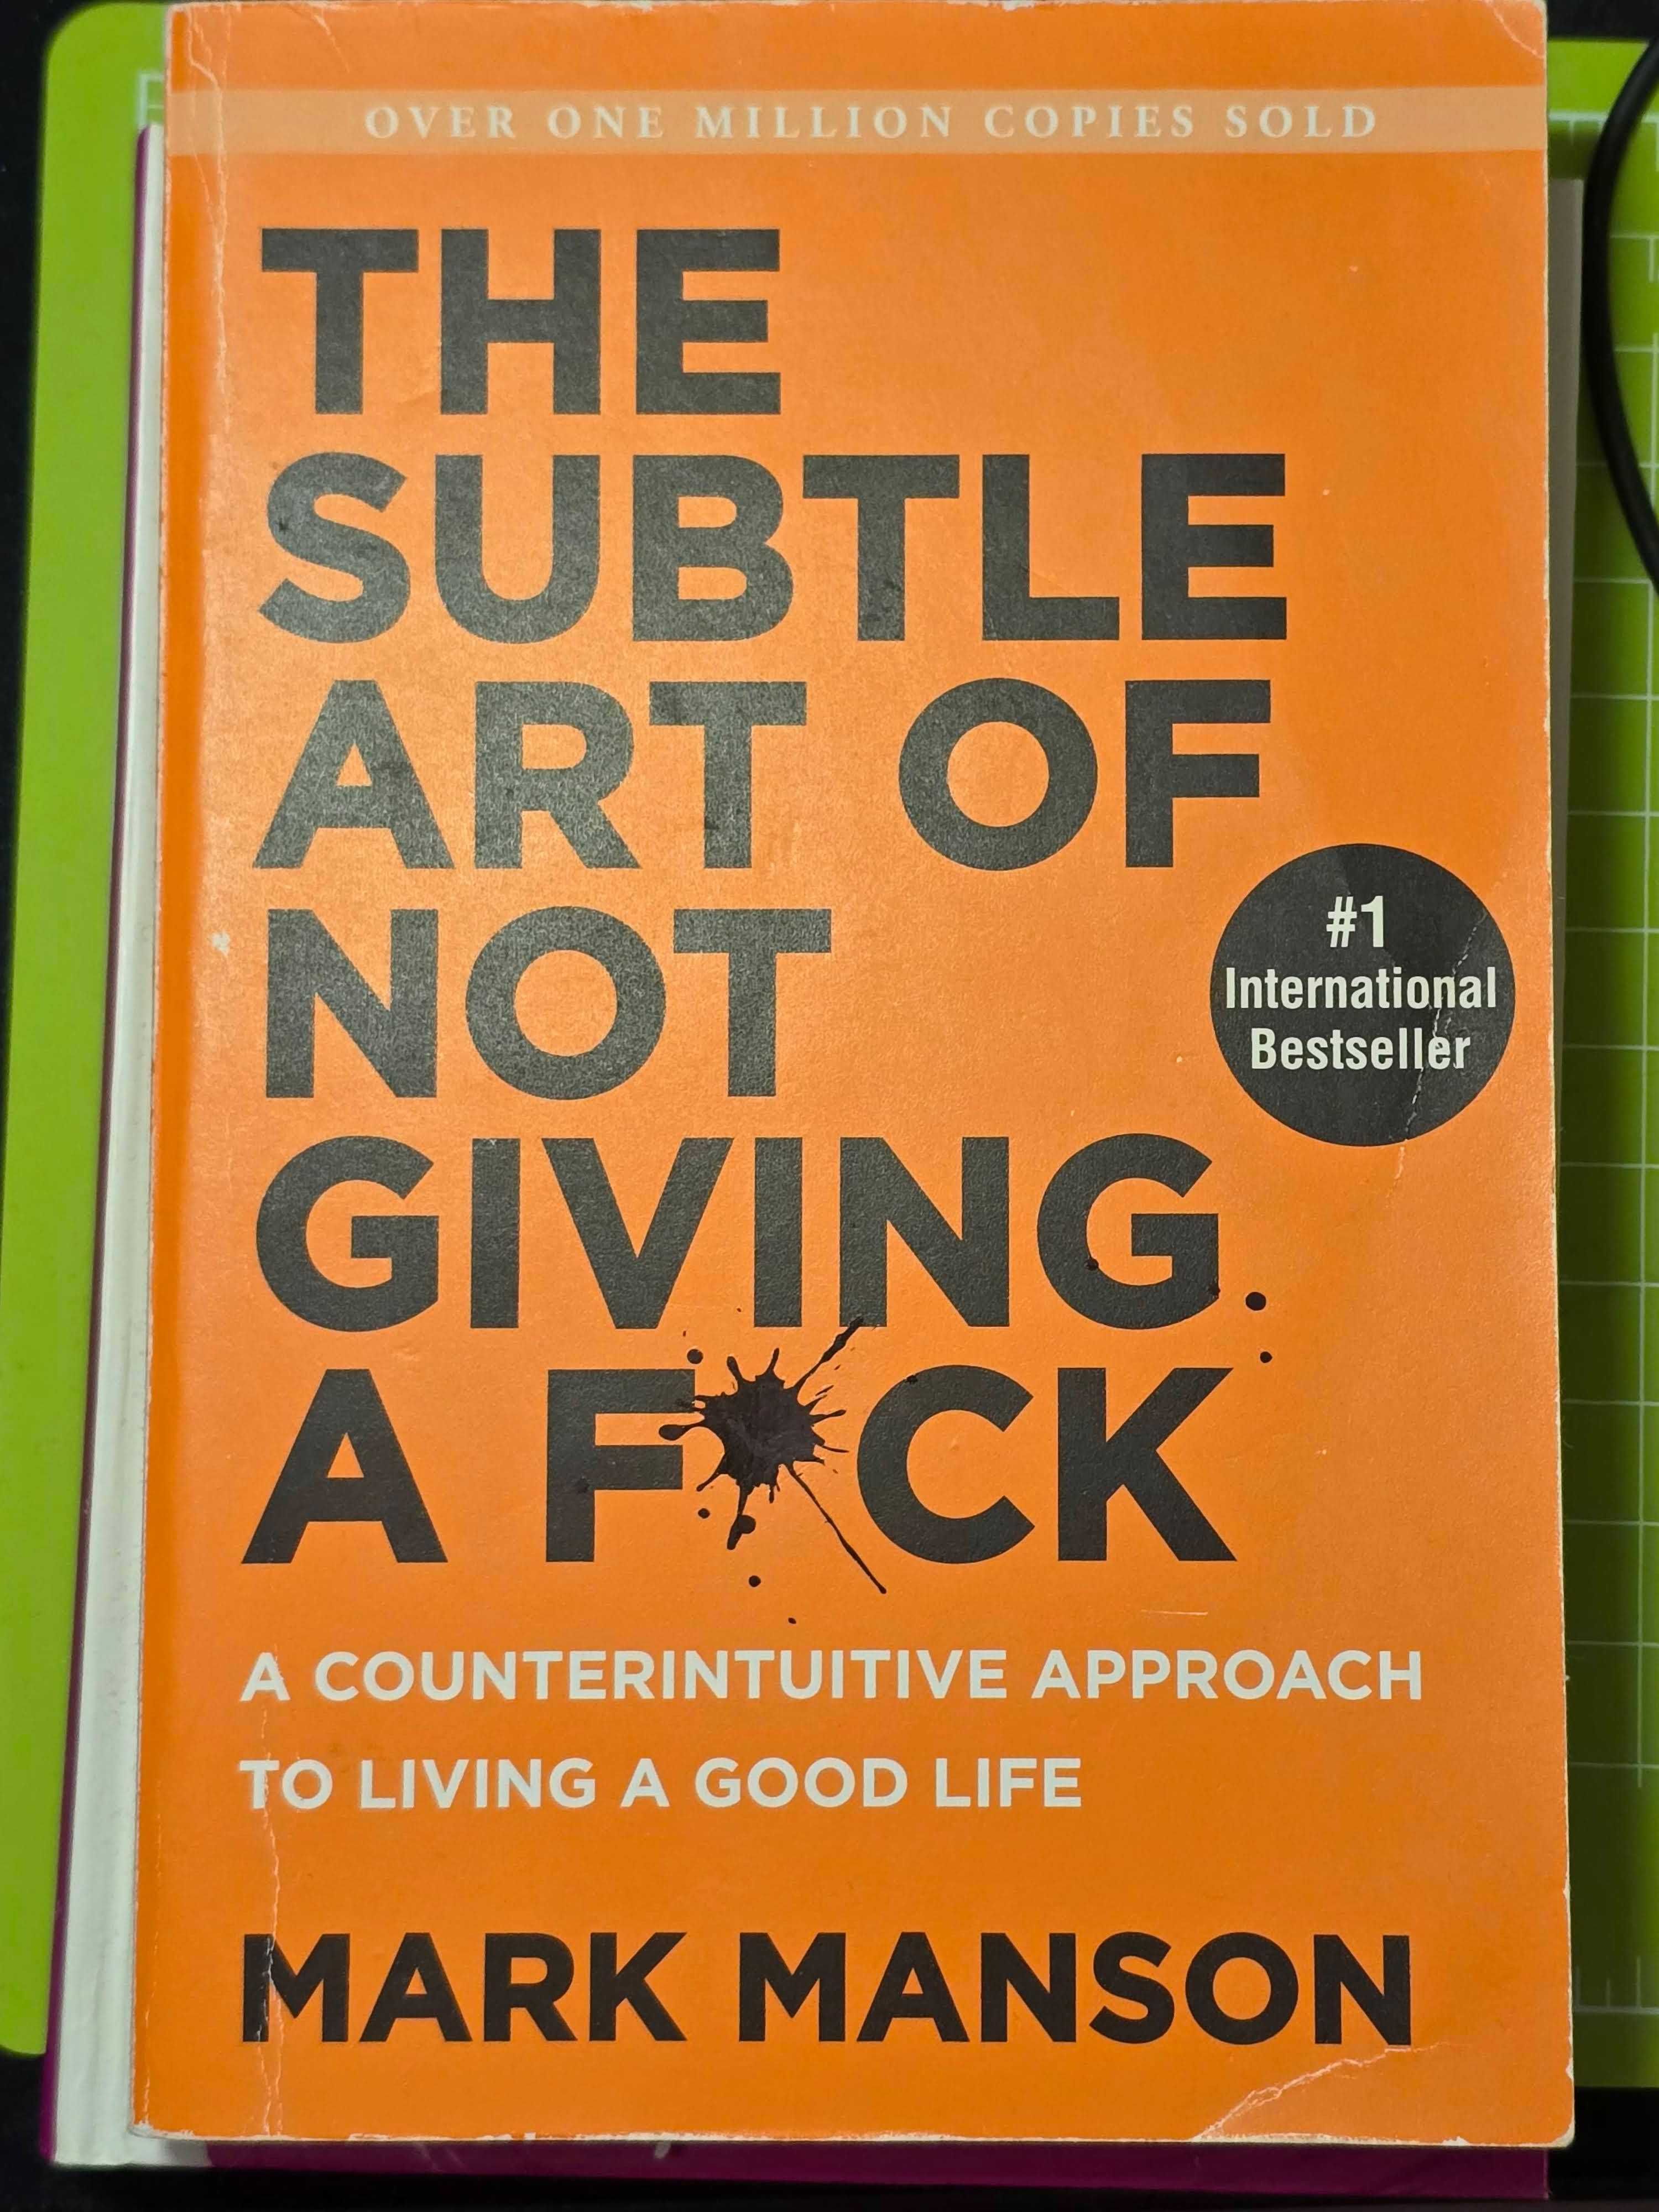 The Subtle Art of Not Giving a F*ck: A Counterintuitive Approach